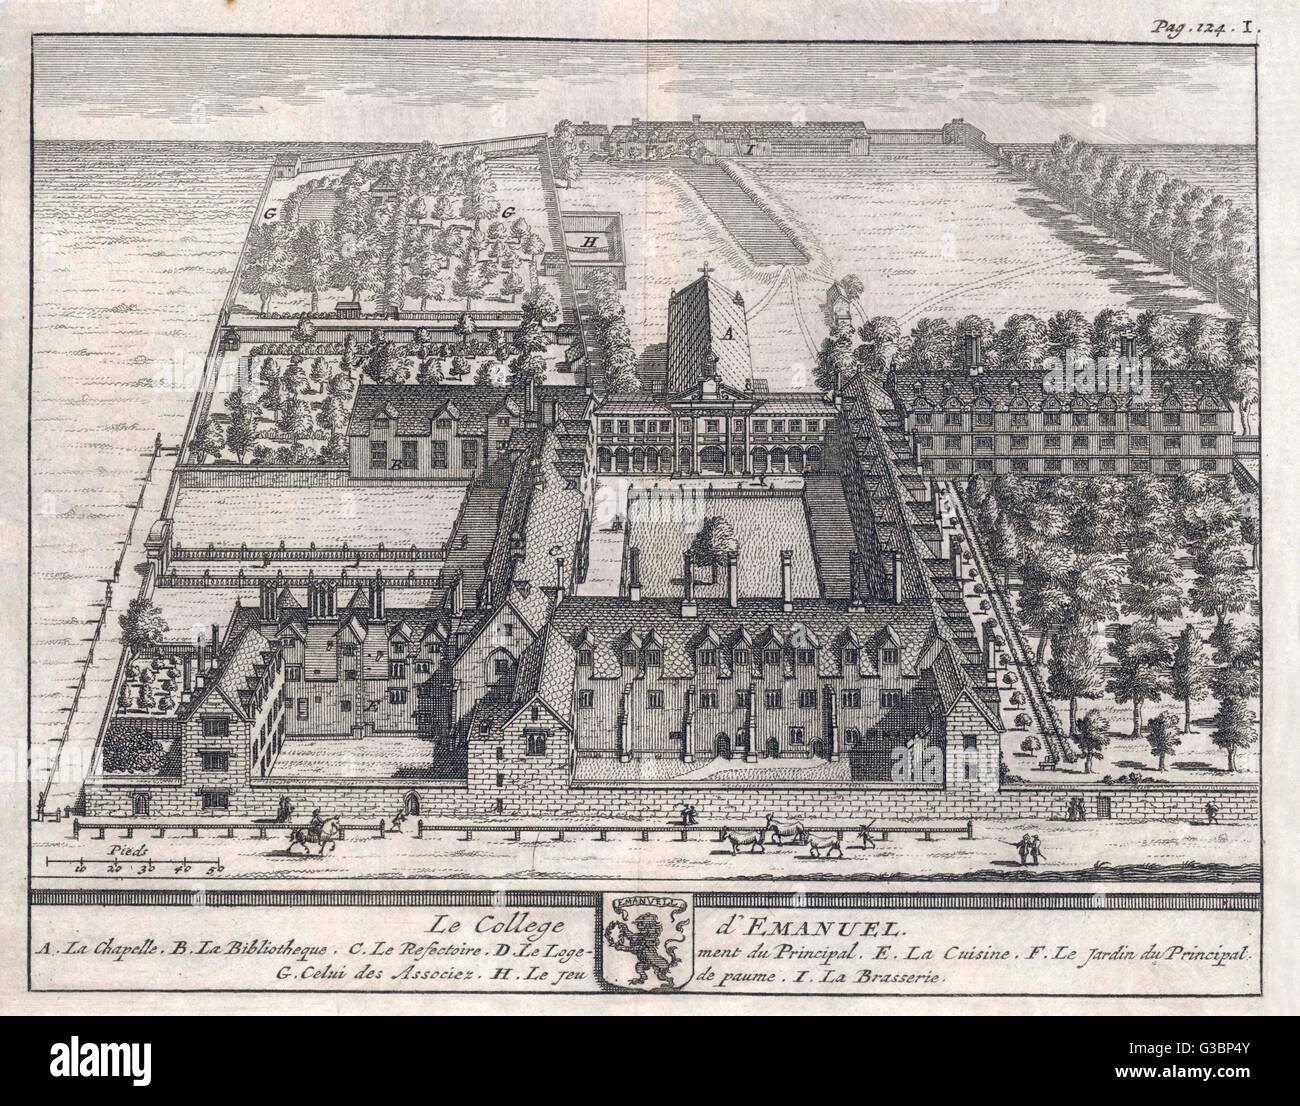 A bird's-eye view of the college showing the chapel, dining  hall, library, the Dean's  lodgings, gardens, brewery, kitchen &amp; an area for real- tennis or le jeu de paume.      Date: 1690 Stock Photo